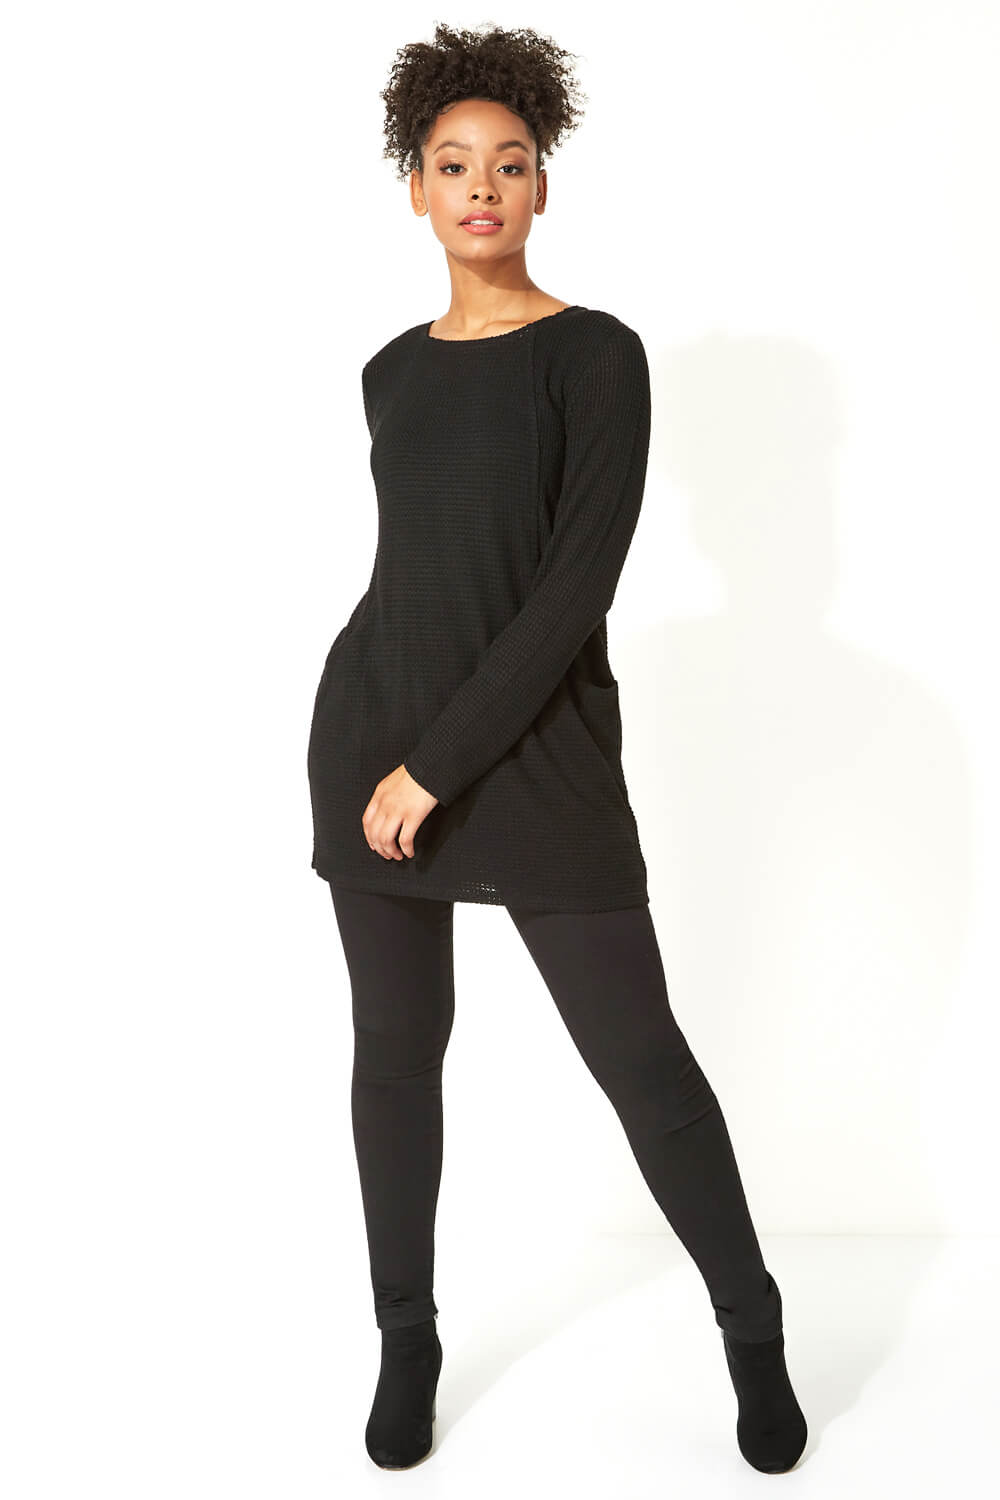 Black Textured Longline Top with Snood, Image 2 of 6